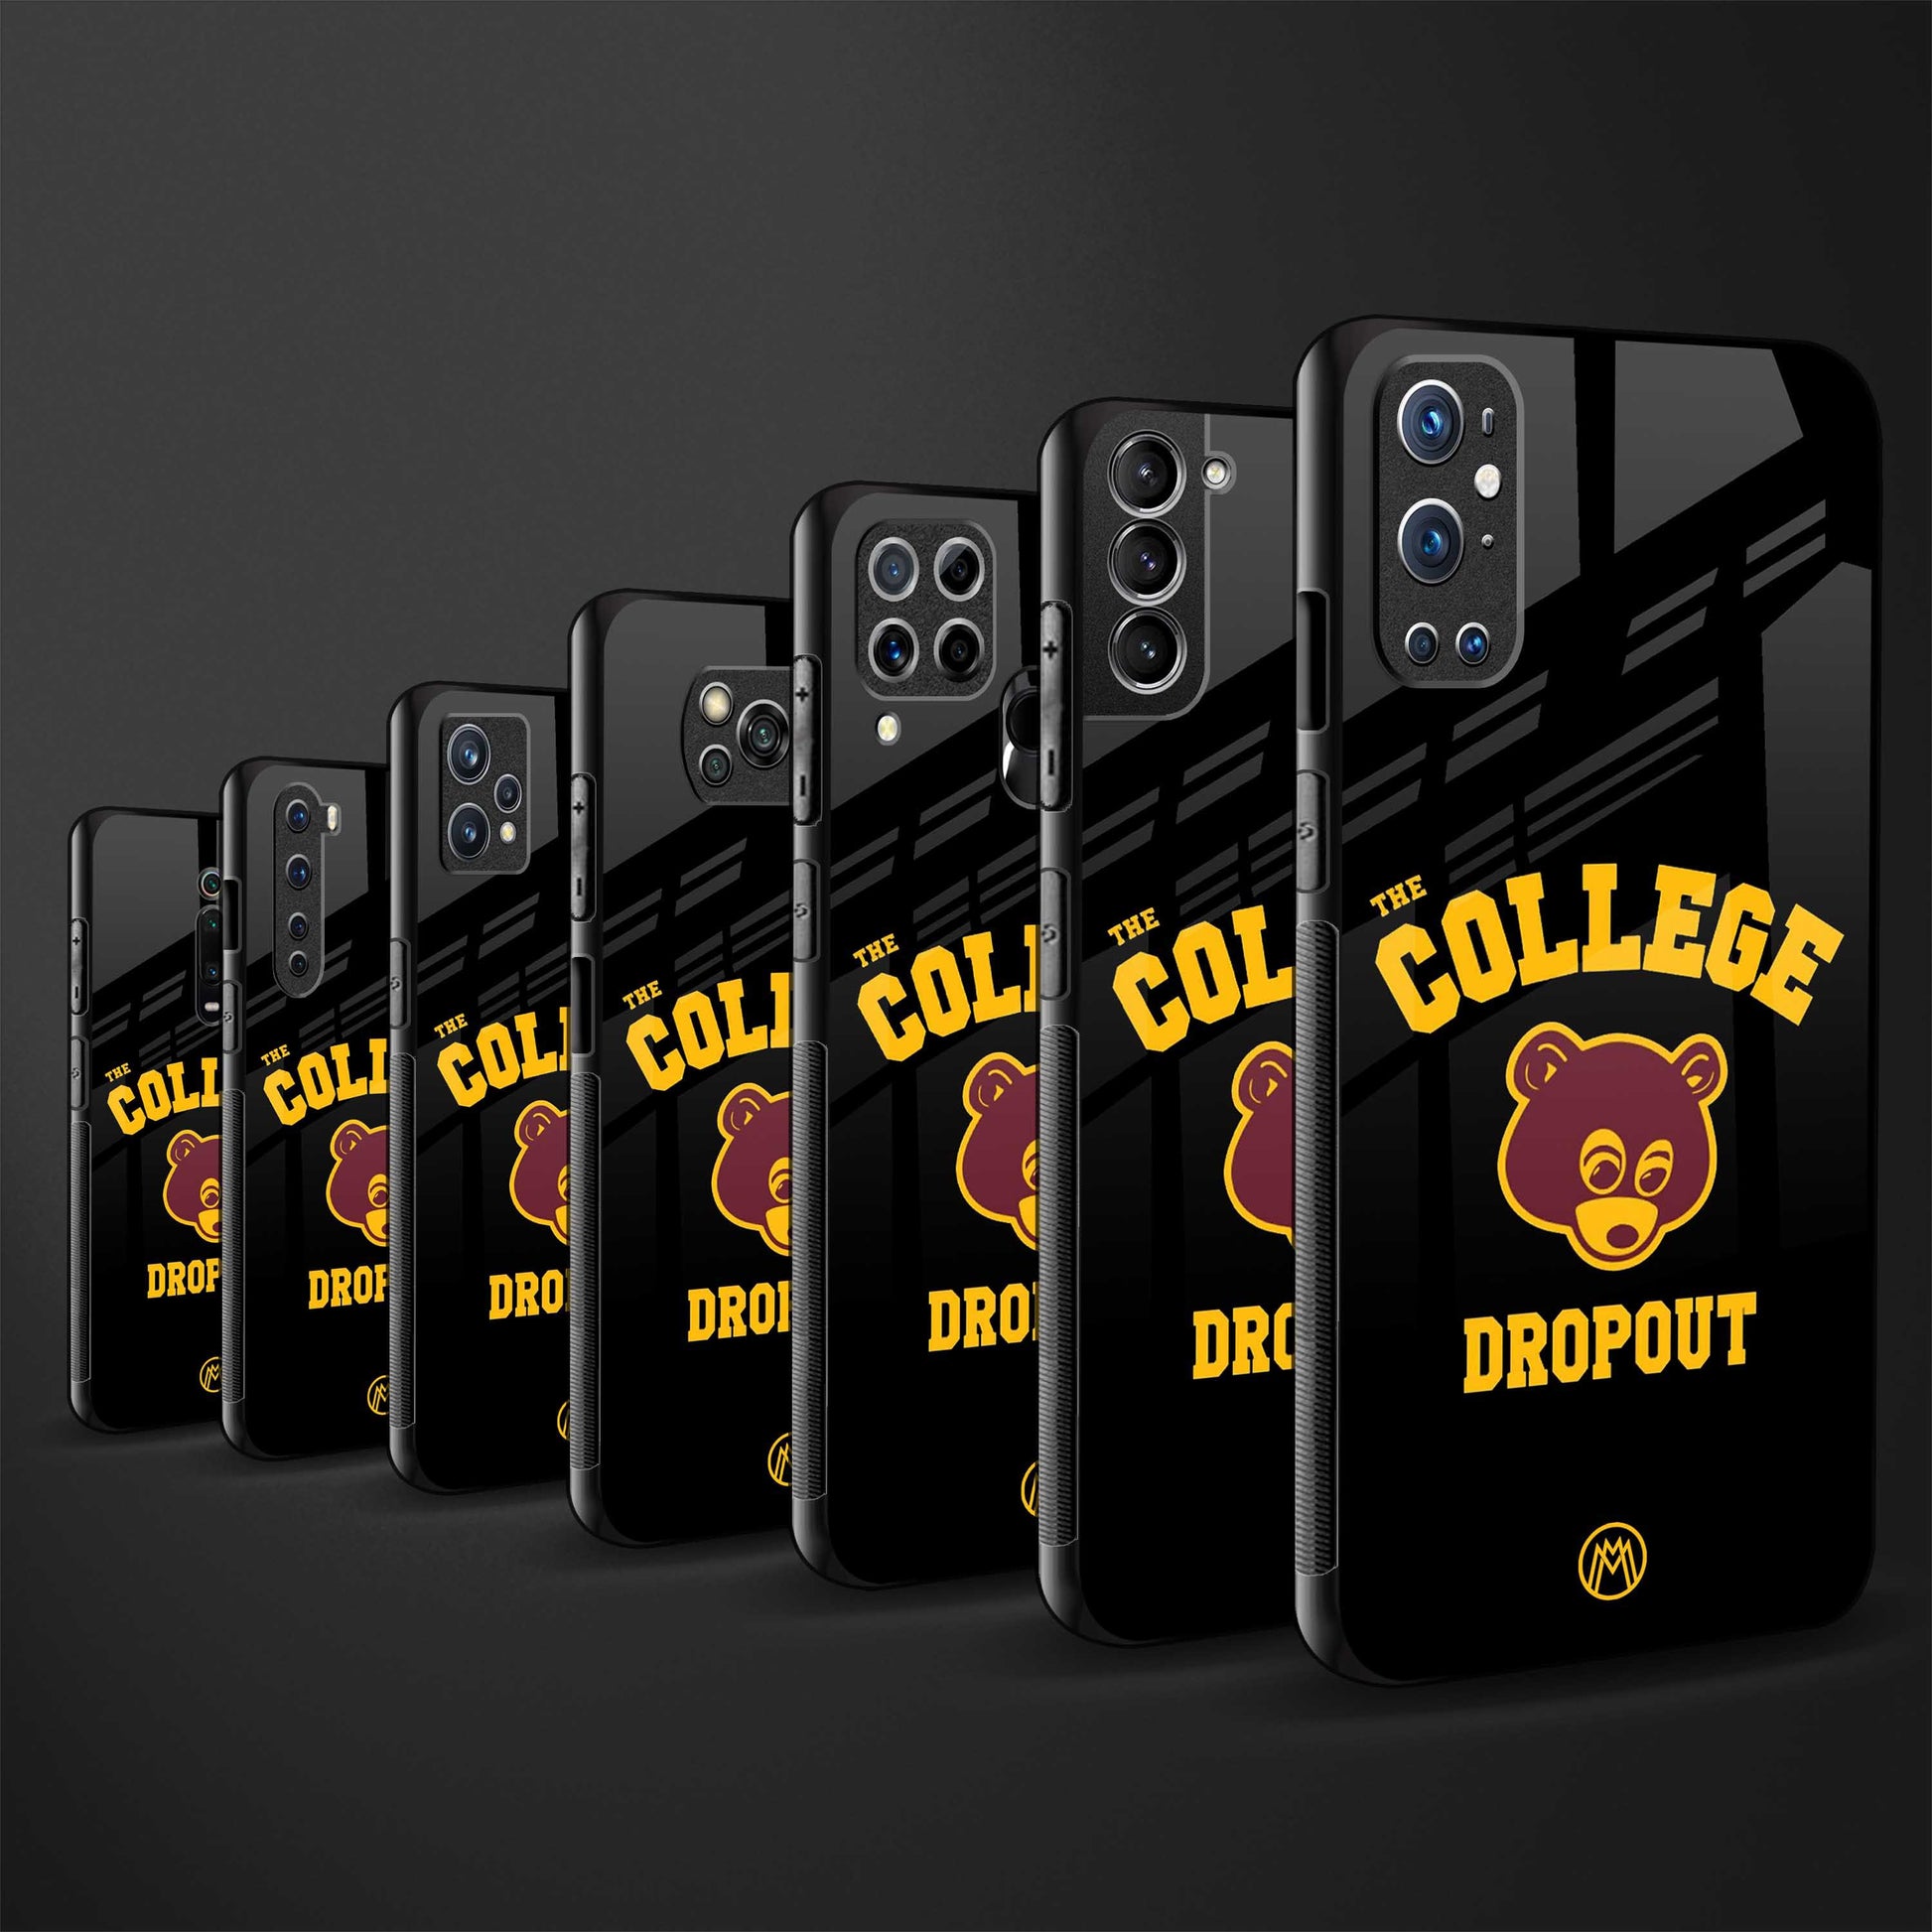 the college dropout back phone cover | glass case for redmi note 11 pro plus 4g/5g